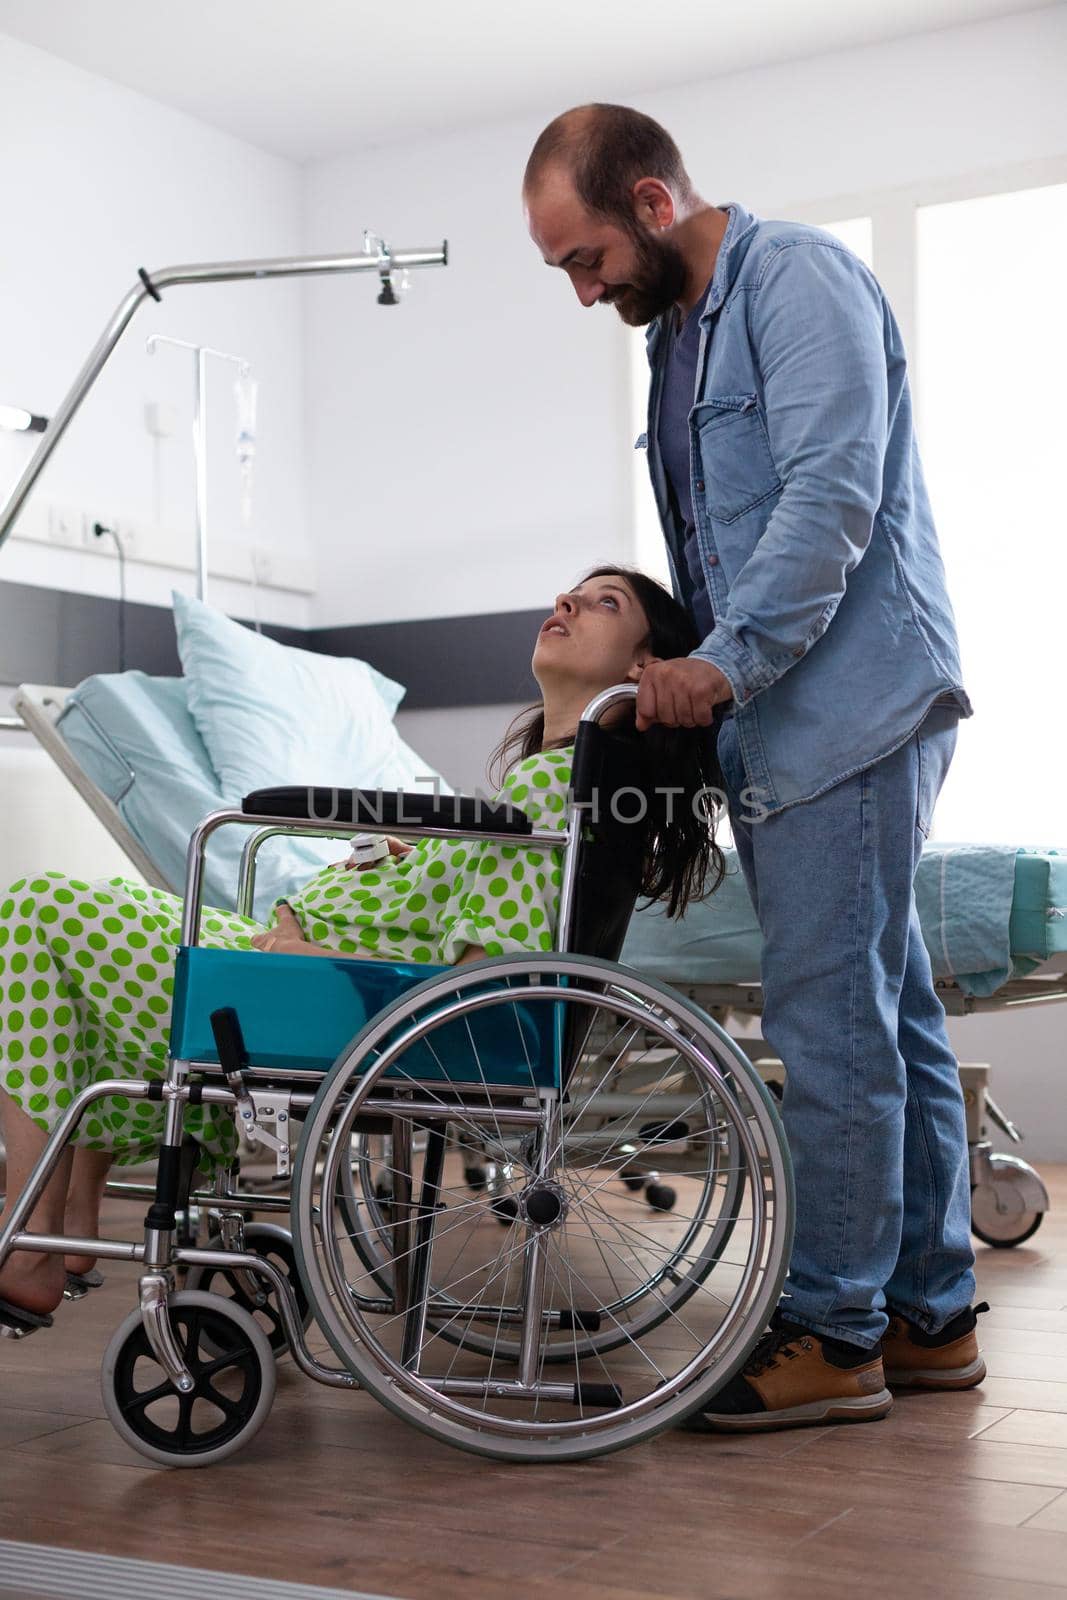 Caucasian pregnant woman sitting in wheelchair while father of baby assisting wife preparing for child delivery in hospital ward at medical facility. Young couple getting ready for childbirth